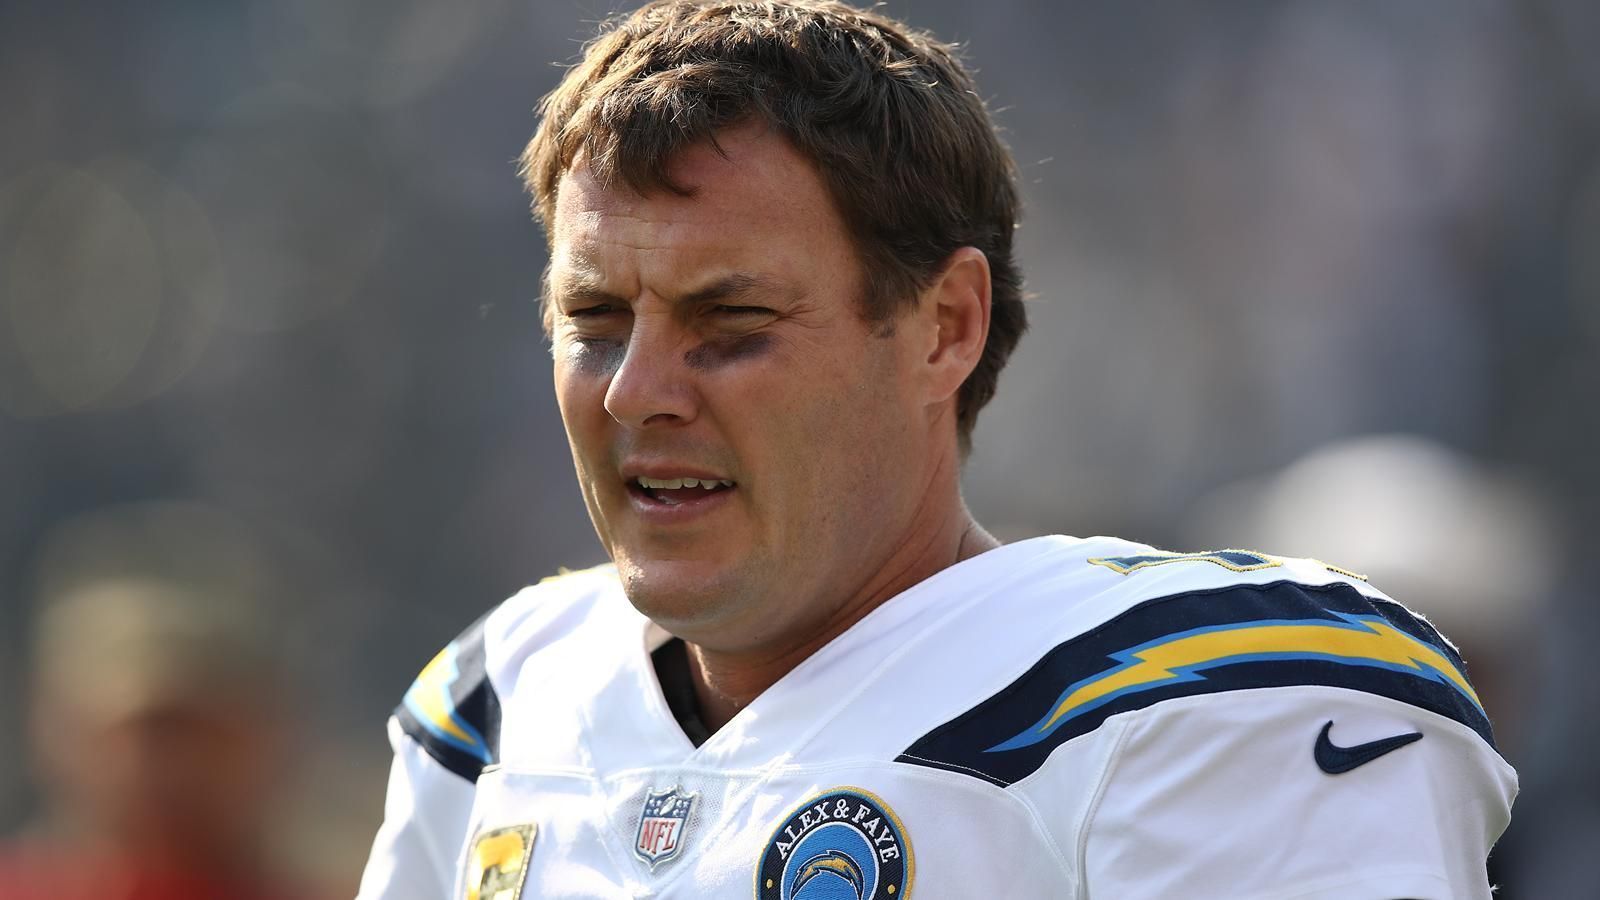 
                <strong>Woche 12</strong><br>
                AFC Offensive Player of the Week: Philip Rivers (Quarterback - Los Angeles Chargers) im BildAFC Defensive Player of the Week: J.J. Watt (Defensive End - Houston Texans)AFC Special Team Player of the Week: Cyrus Jones (Return Specialist - Baltimore Ravens)NFC Offensive Player of the Week: Amari Cooper (Wide Receiver - Dallas Cowboys)NFC Defensive Player of the Week: Eddie Jackson (Safety - Chicago Bears)NFC Special Team Player of the Week: Sebastian Janikowski (Kicker - Seattle Seahawks)Rookie of the Week: Baker Mayfield (Quarterback - Cleveland Browns)
              